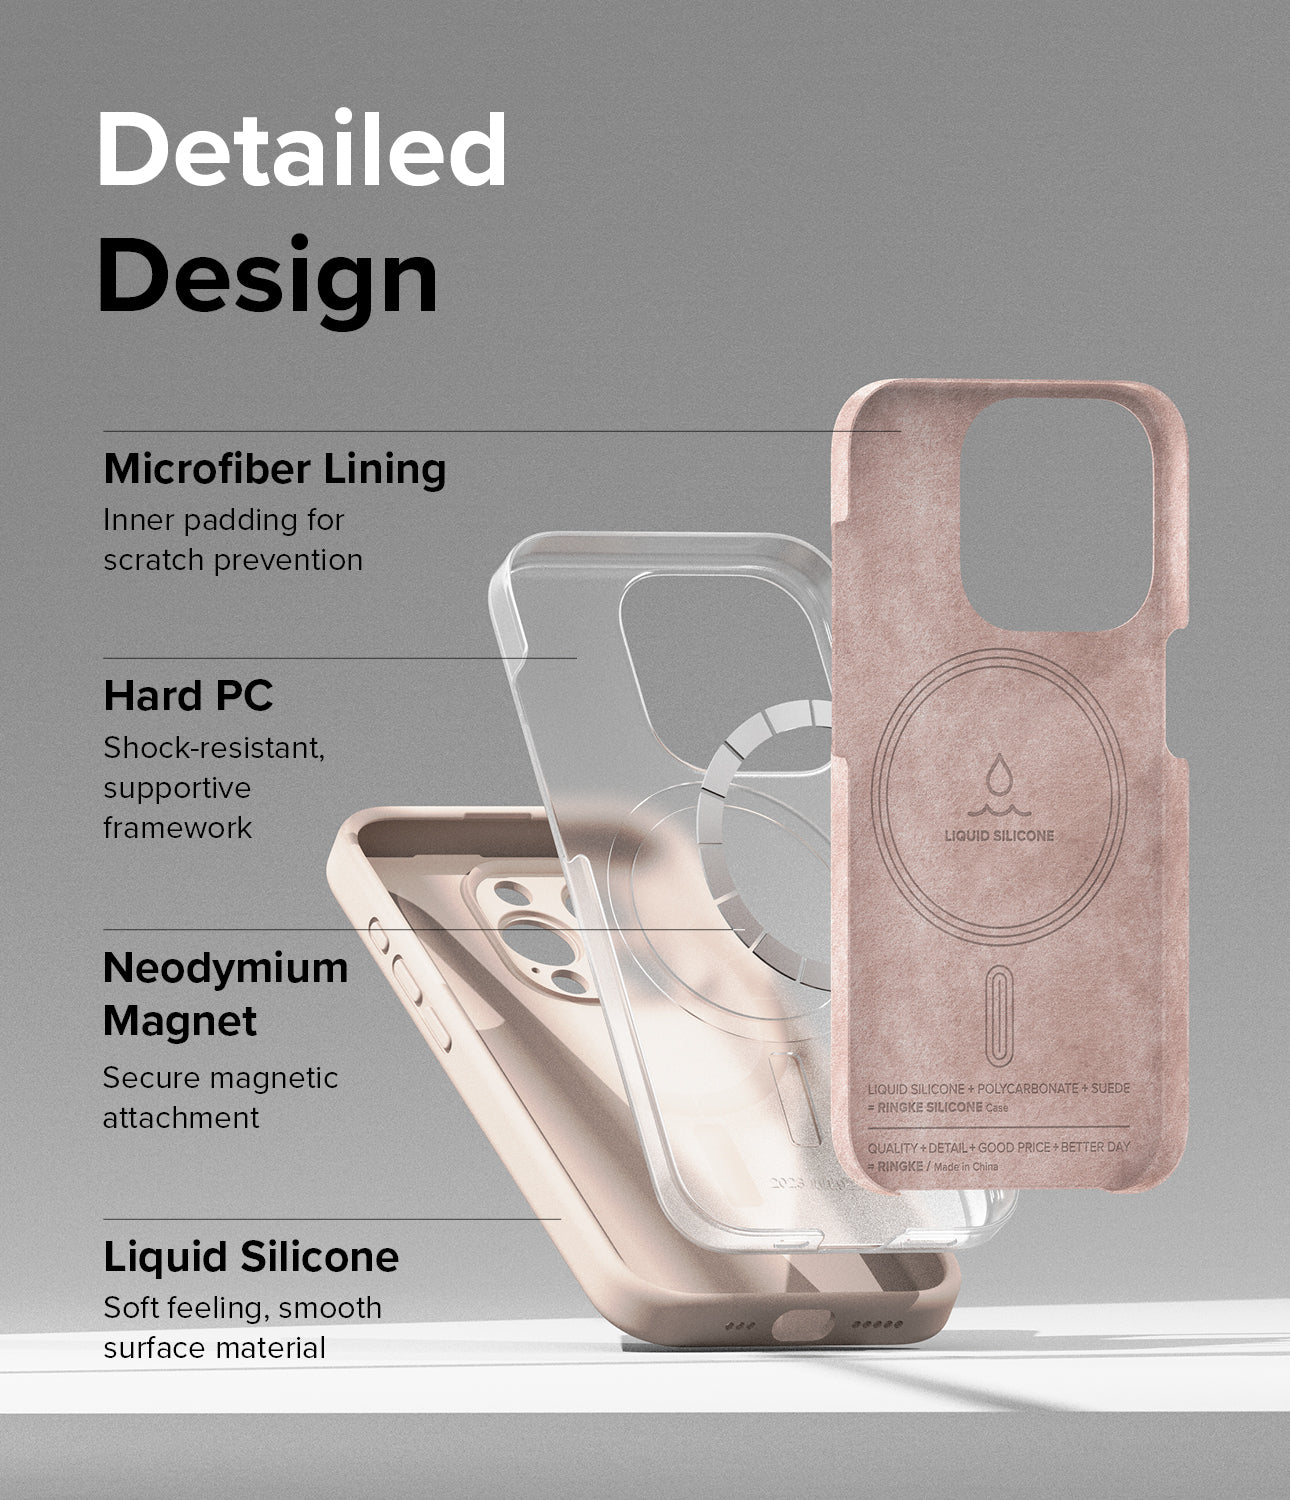 iPhone 15 Pro Case | Silicone Magnetic - Sand Pink - Detailed Design. Inner padding for scratch prevention with Microfiber Lining. Shock-resistant, supportive framework with Hard PC. Neodymium Magnet to secure magnetic attachment. Soft feeling, smooth surface Liquid Silicone.